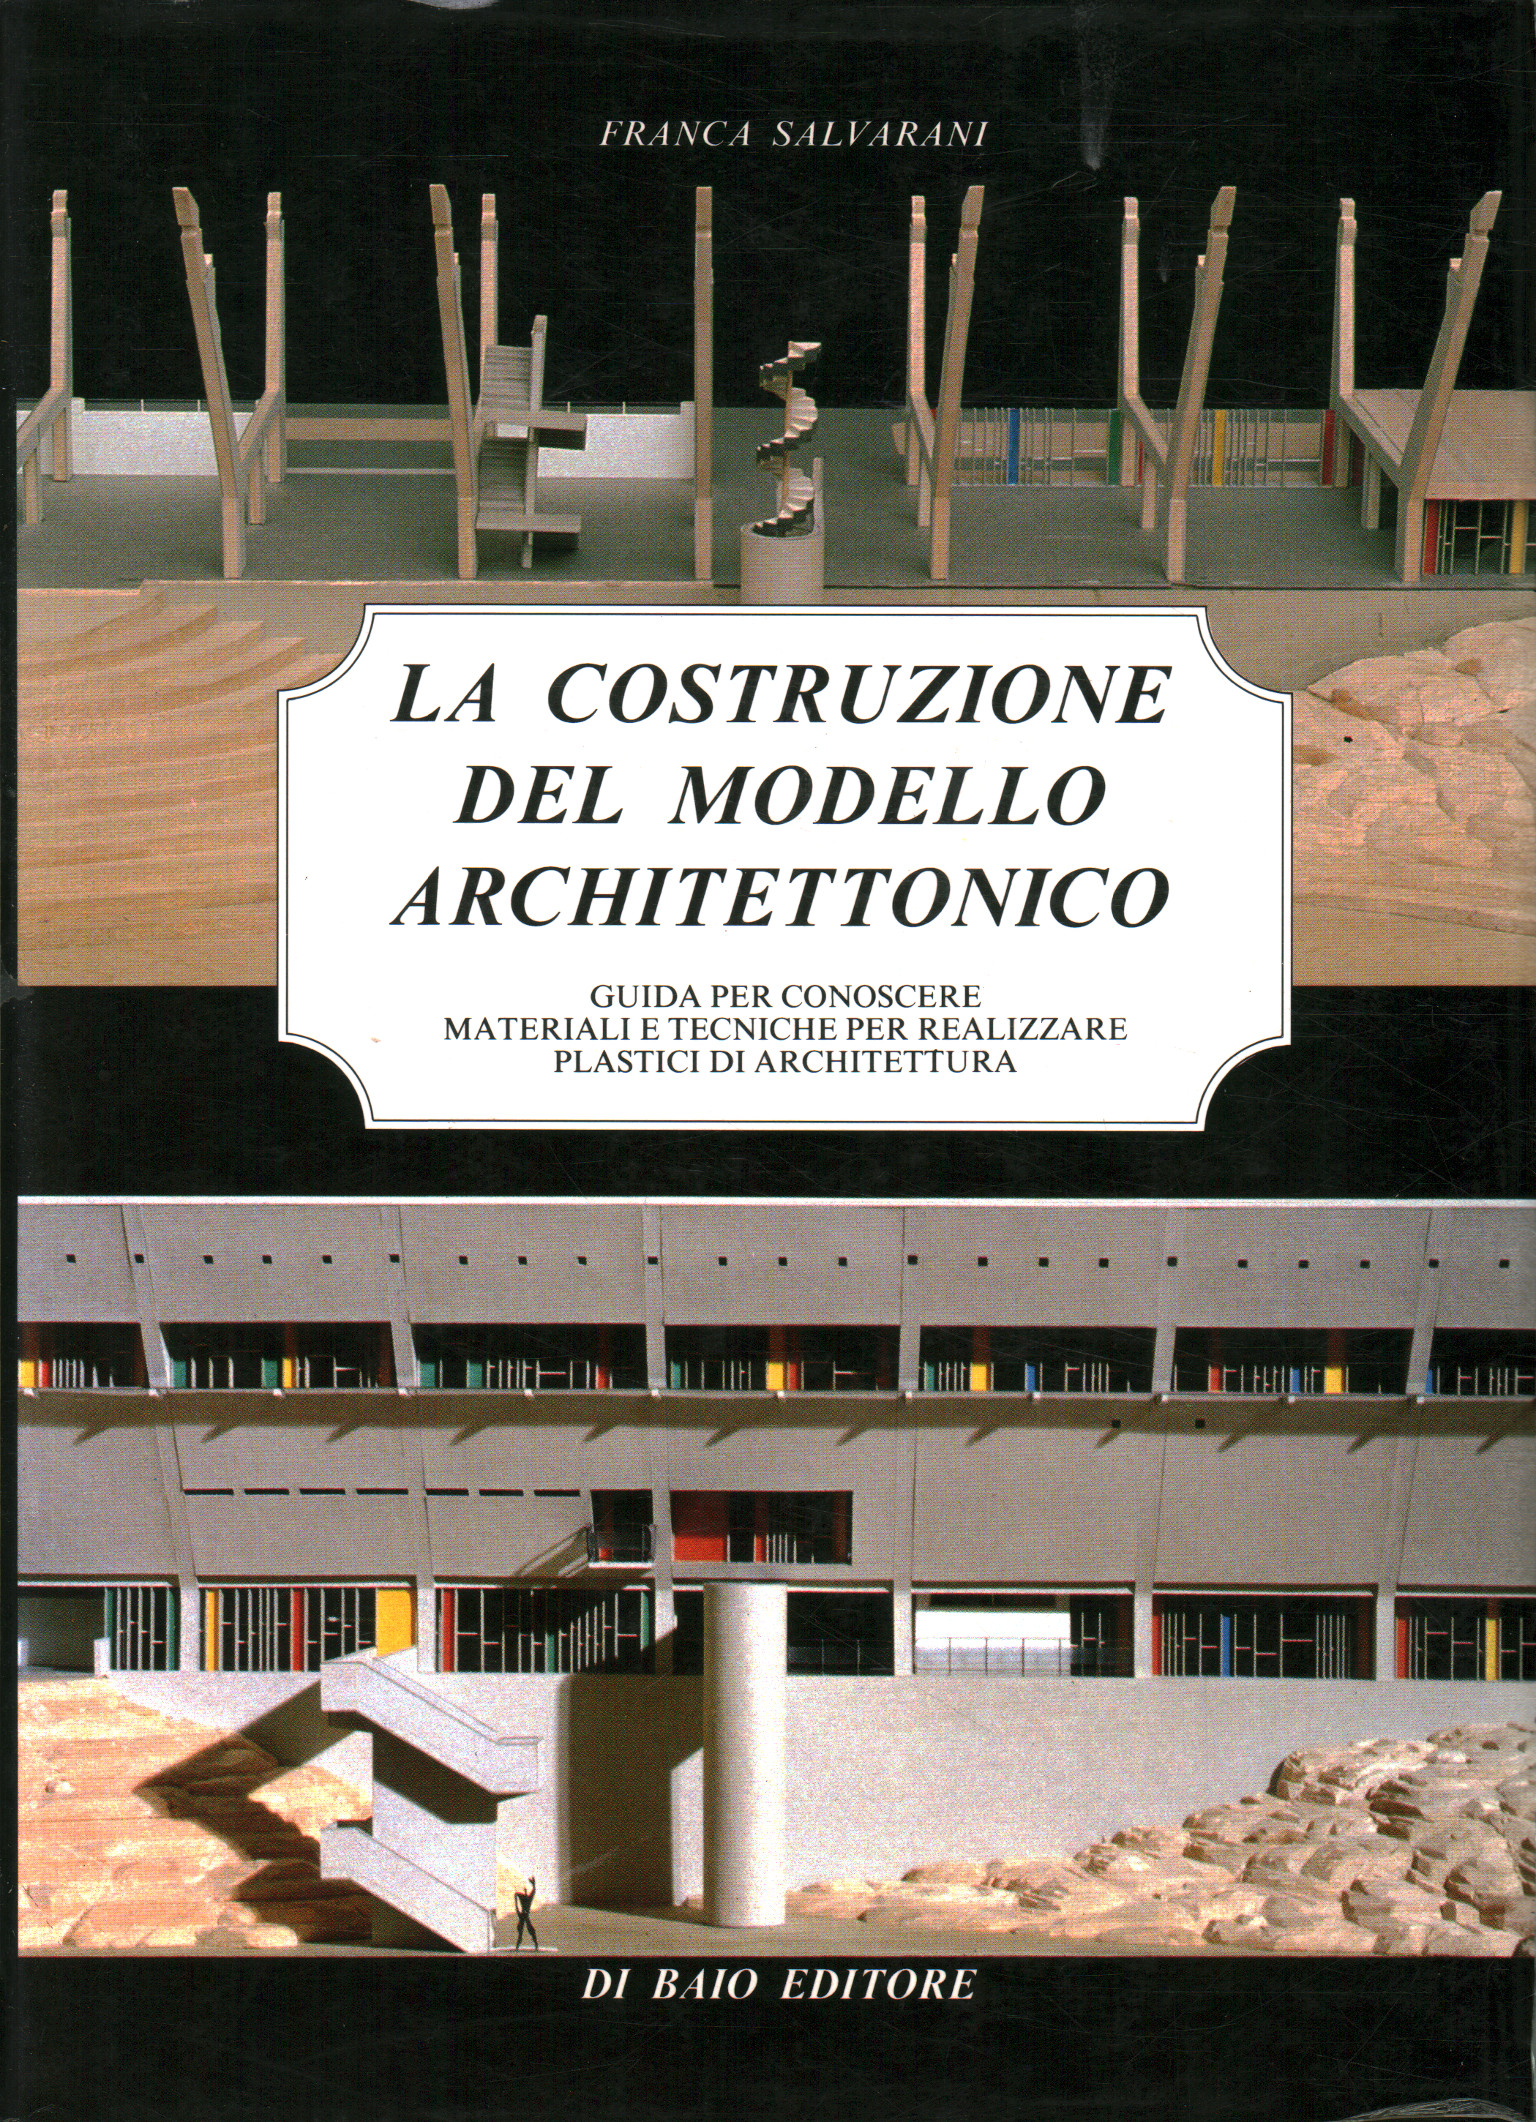 The construction of the architectural model